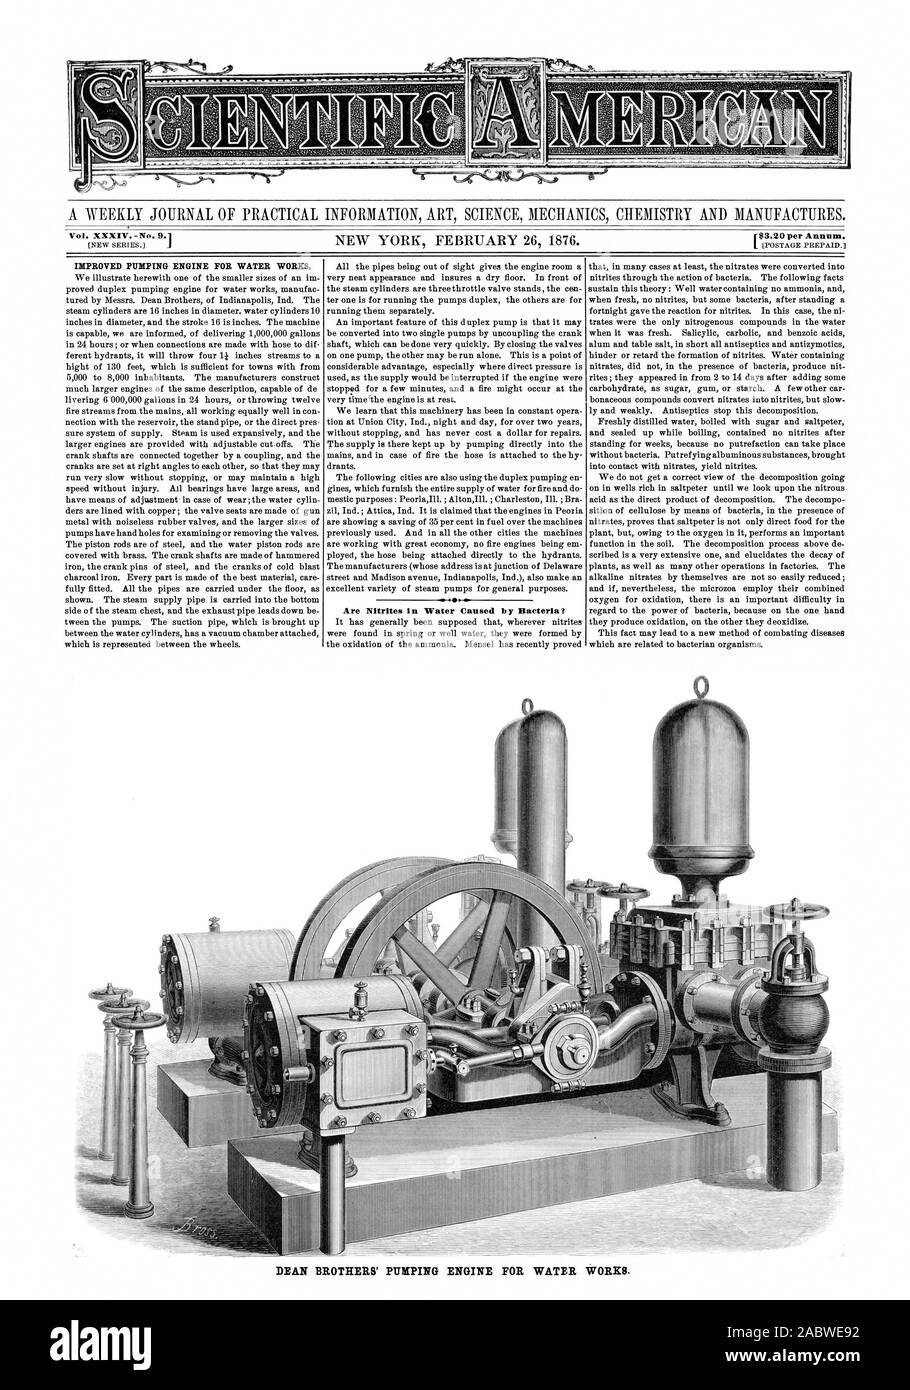 A WEEKLY JOURNAL OF PRACTICAL INFORMATION ART SCIENCE MECHANICS CHEMISTRY AND MANUFACTURES. r$3.20 per Annum. Are Nitrites in Water Caused by Bacteria? DEAN BROTHERS' PUMPING ENGINE FOR WATER WORKS., scientific american, 1876-02-26 Stock Photo